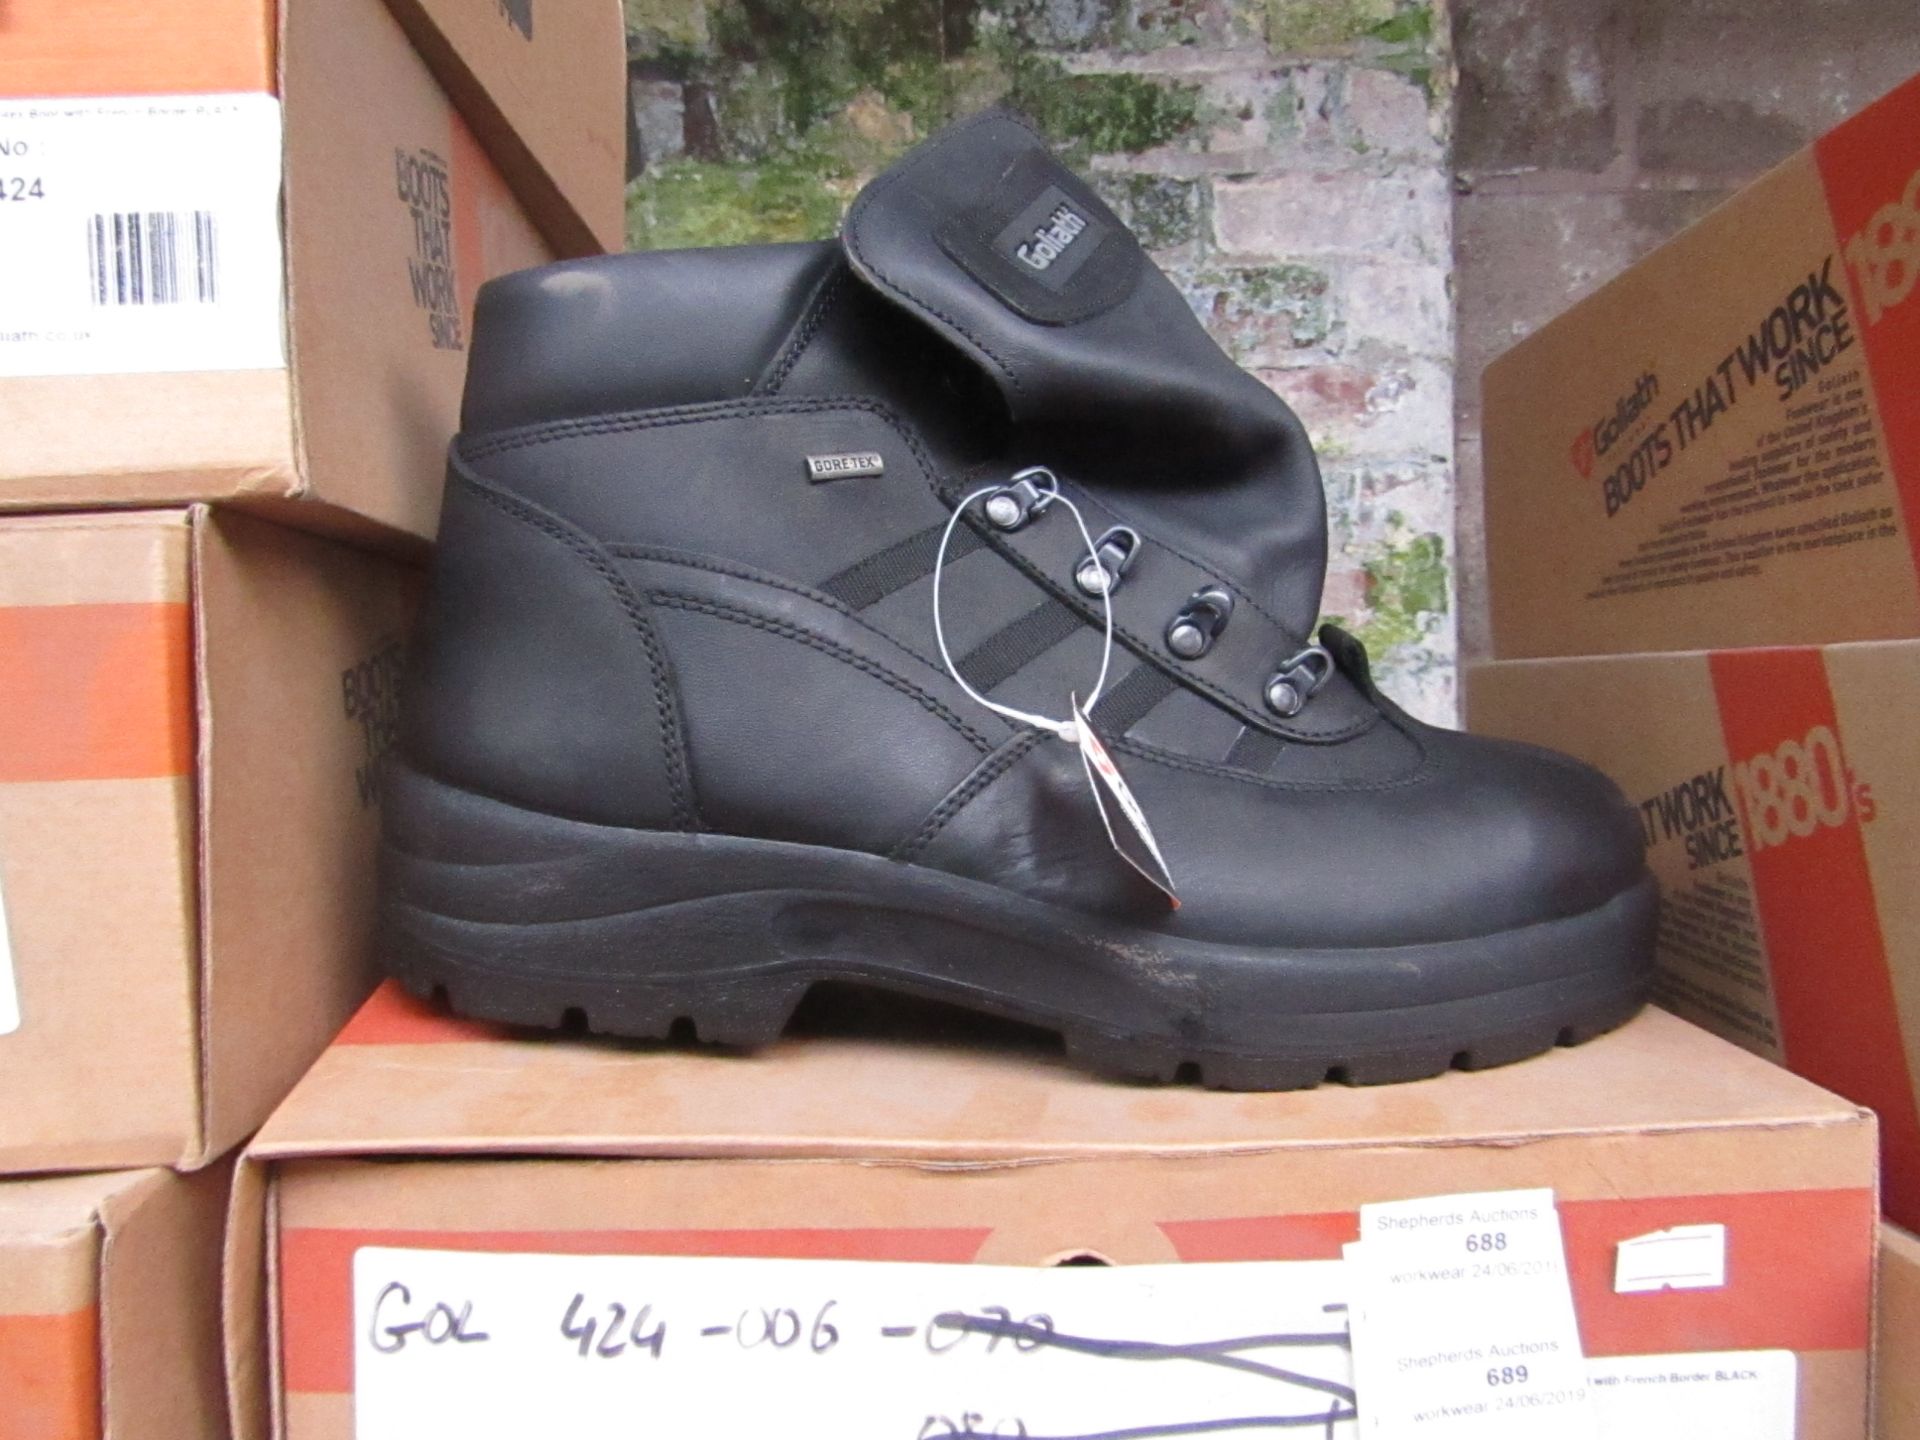 Goliath black gore tex ankle boot, size 10, new and boxed. RRP £49.99